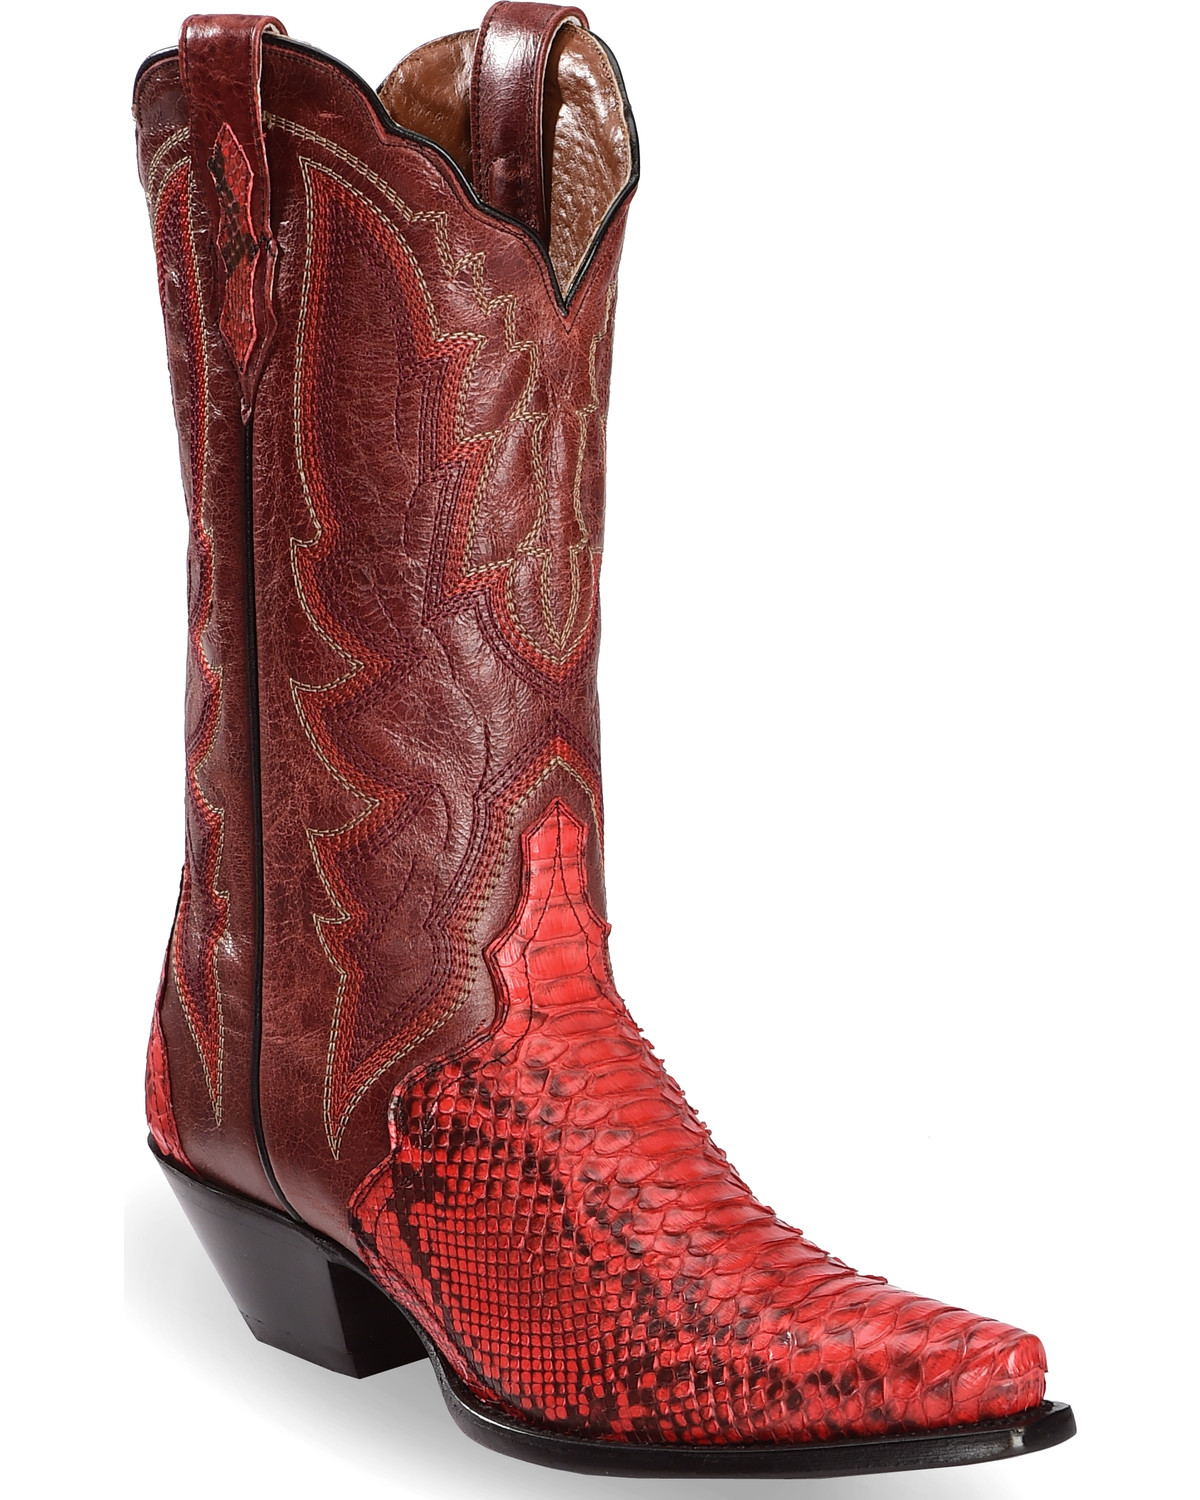 Details about  / Dan Post Wicked Python Women/'s Cowboy Boot DP3044 $300